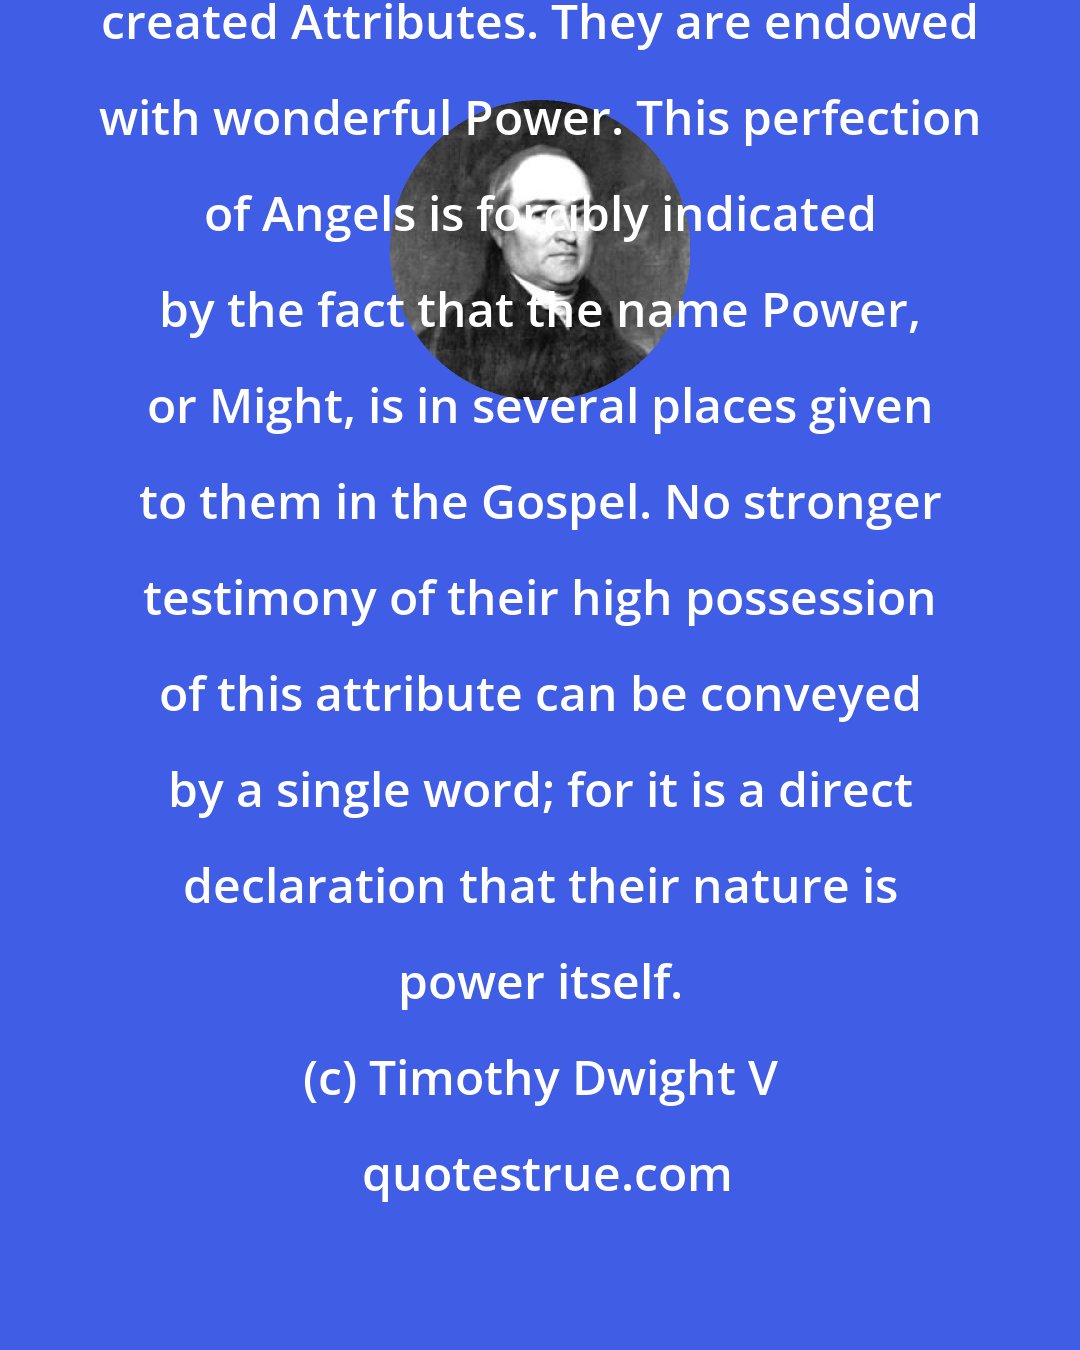 Timothy Dwight V: Angels are endowed with the noblest created Attributes. They are endowed with wonderful Power. This perfection of Angels is forcibly indicated by the fact that the name Power, or Might, is in several places given to them in the Gospel. No stronger testimony of their high possession of this attribute can be conveyed by a single word; for it is a direct declaration that their nature is power itself.